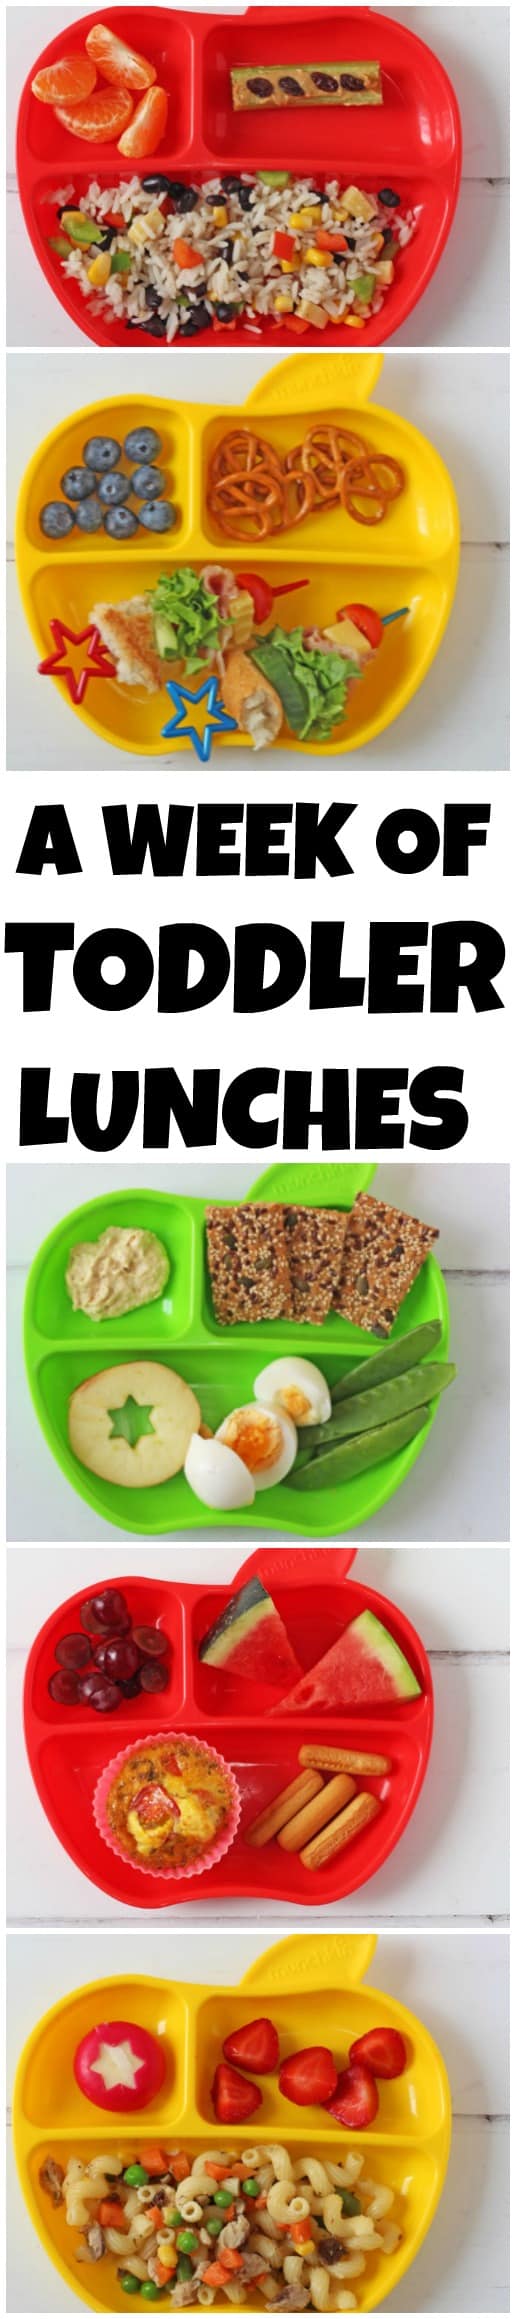 A Week of Lunch Ideas For Toddlers Pinterest Pin